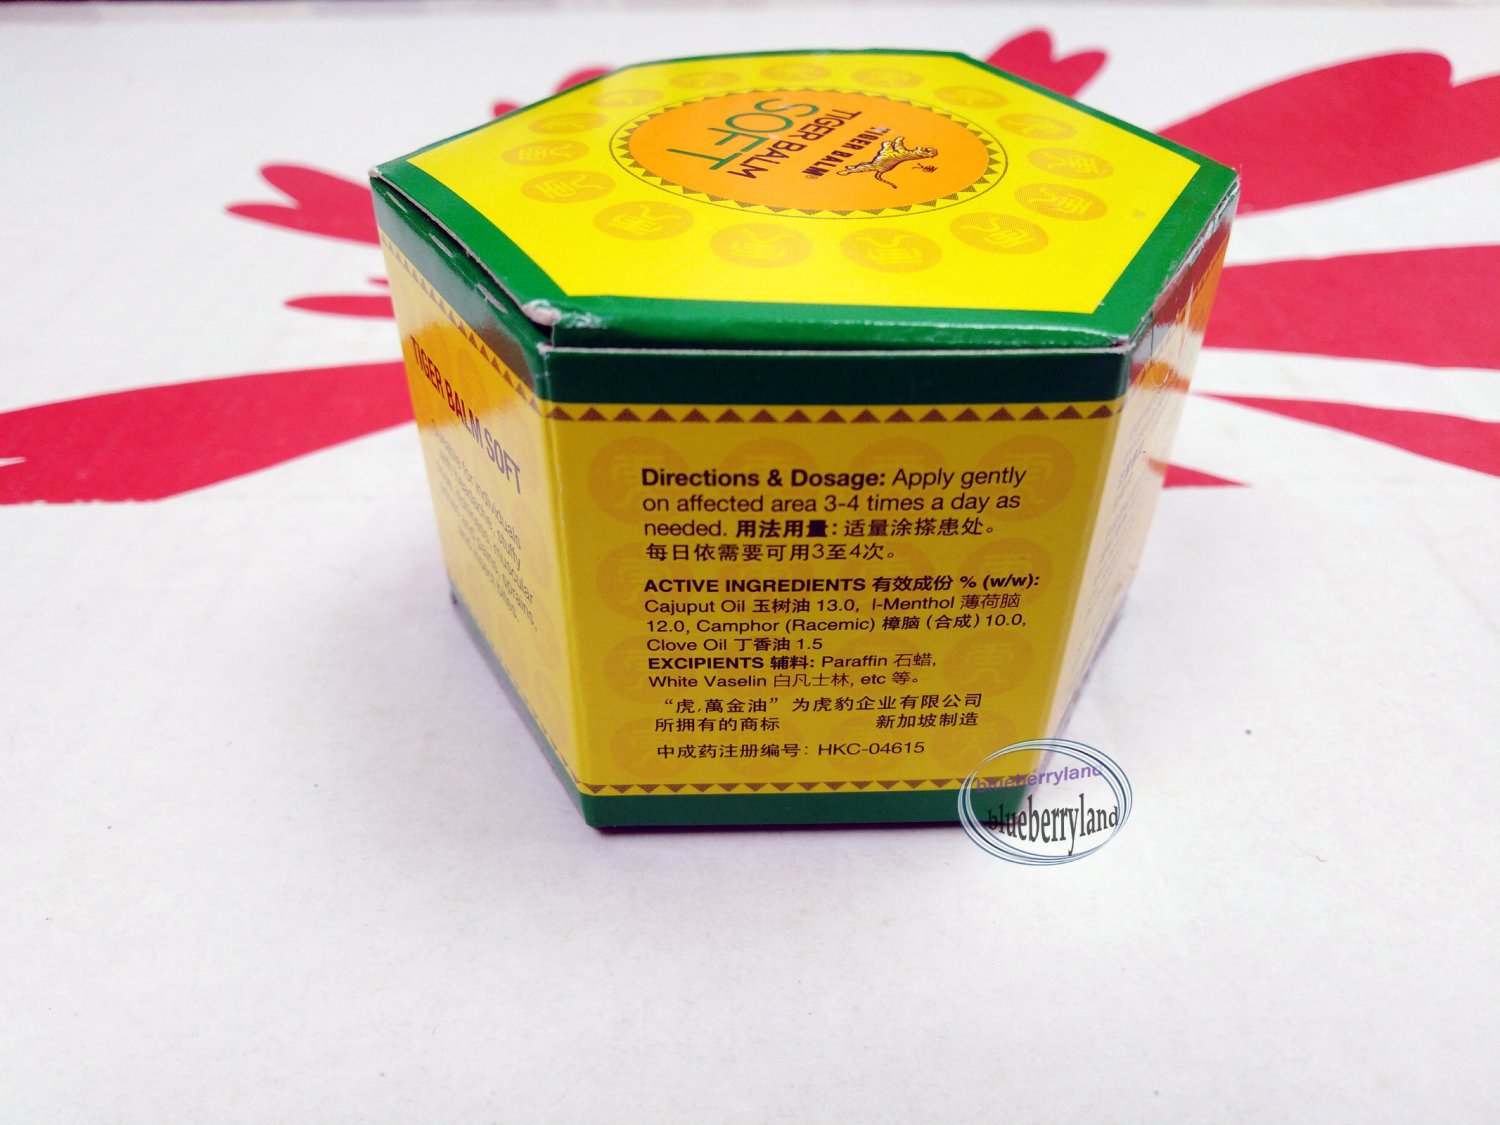 Tiger Balm Soft Large 50g 萬金油 for headaches, stuffy nose, insect bites ...